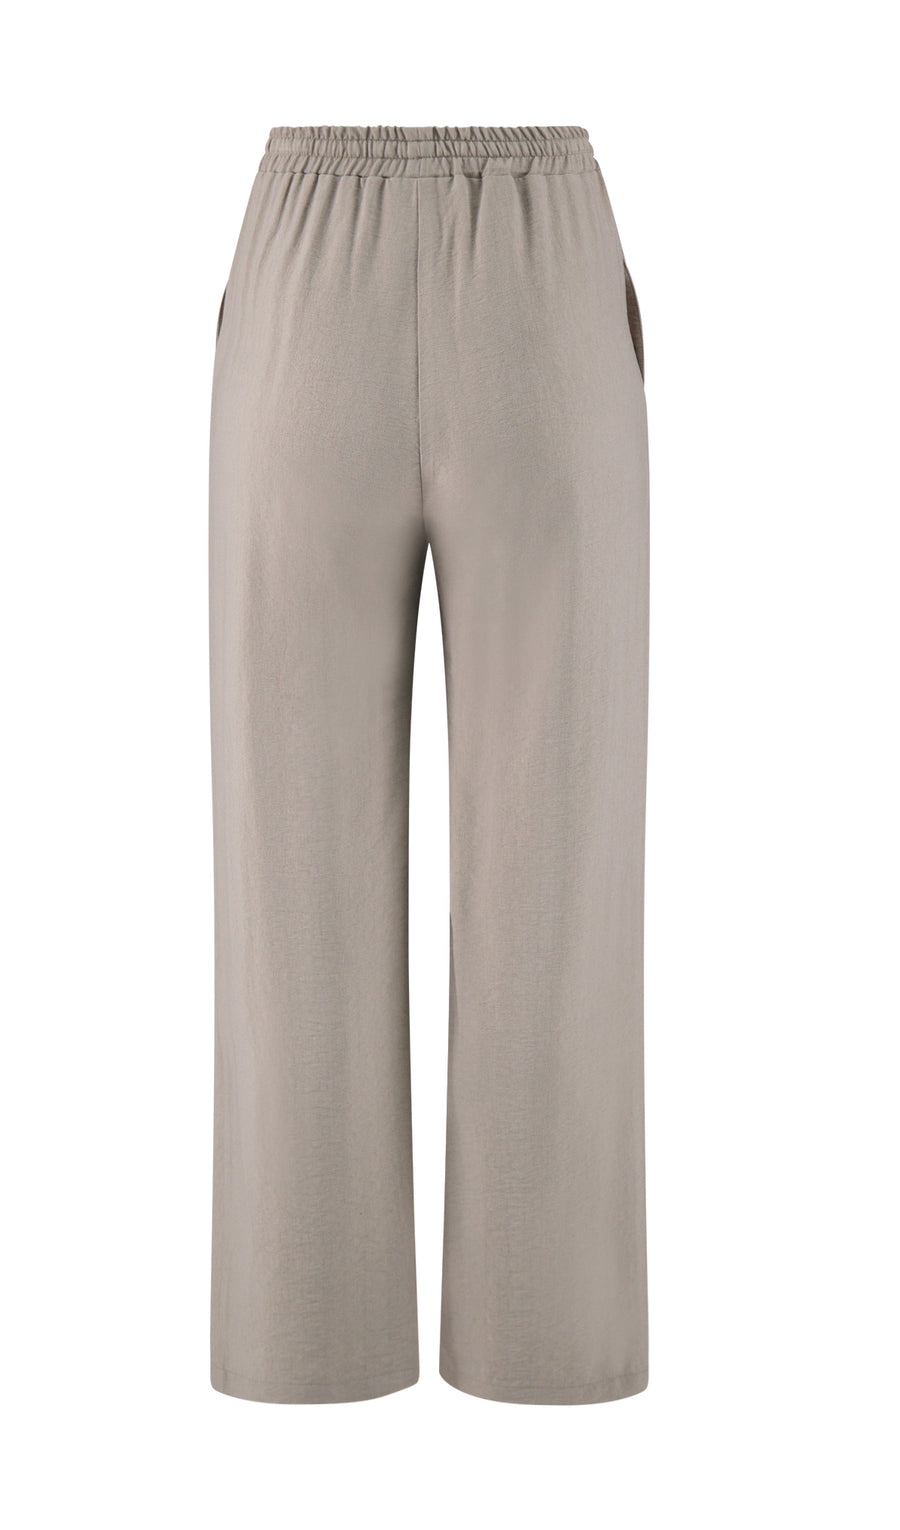 Melrose Pant in Oyster - PERIPHERY